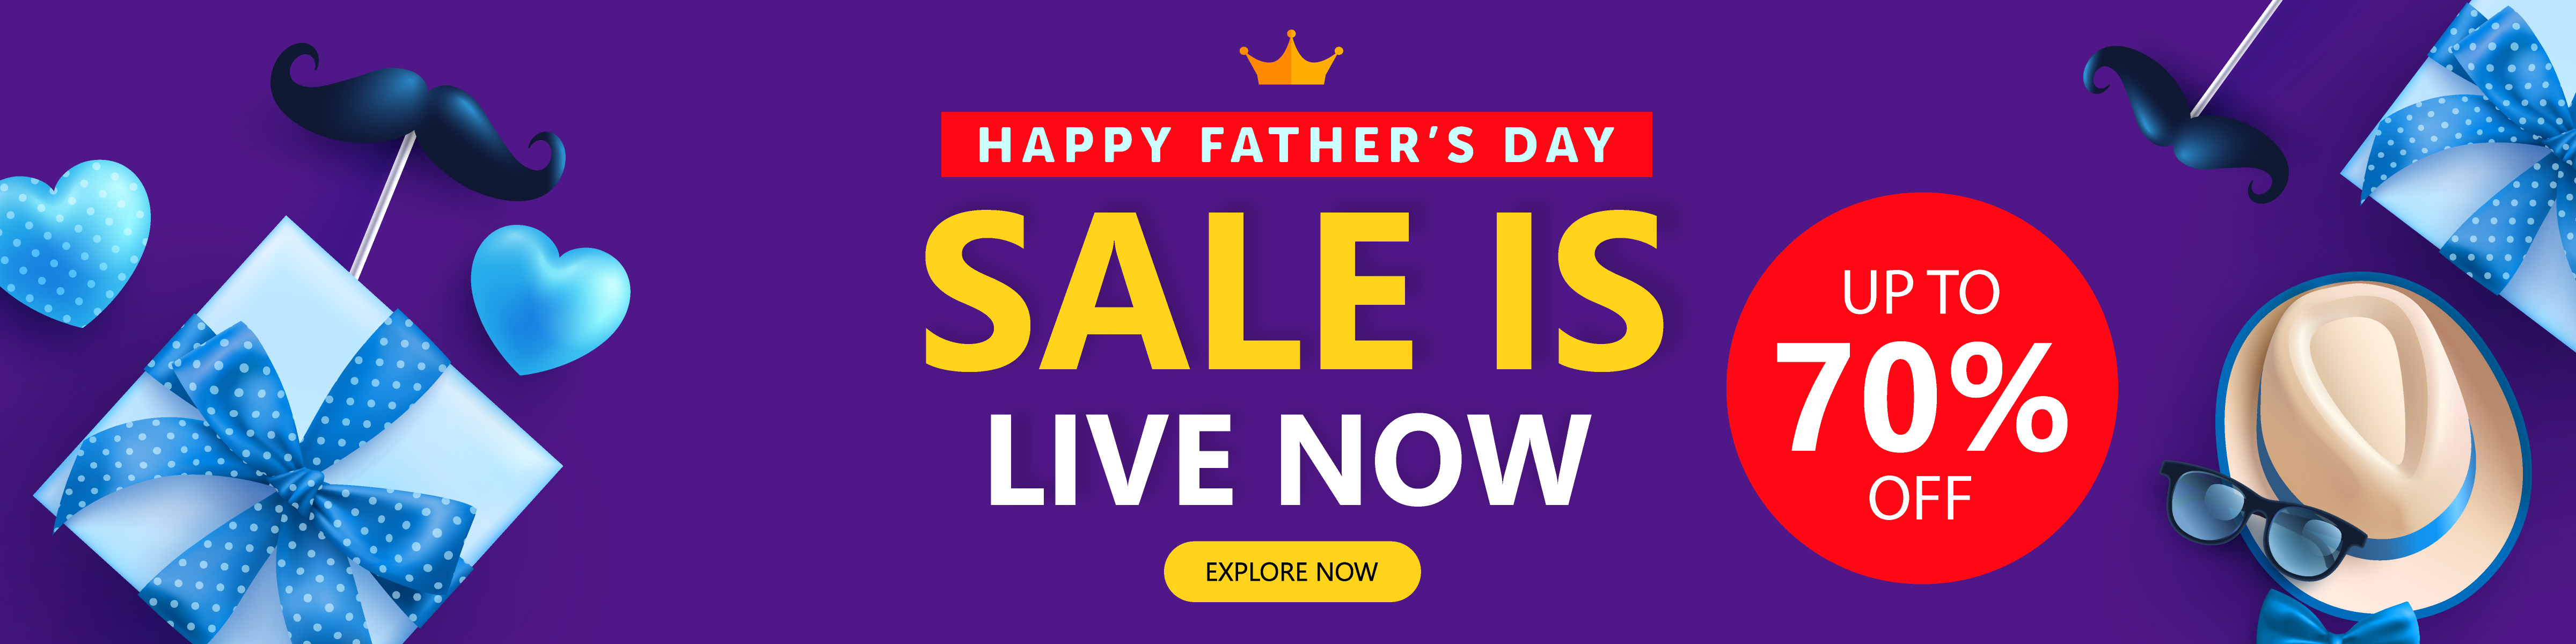 Father Day Offer Banner Image